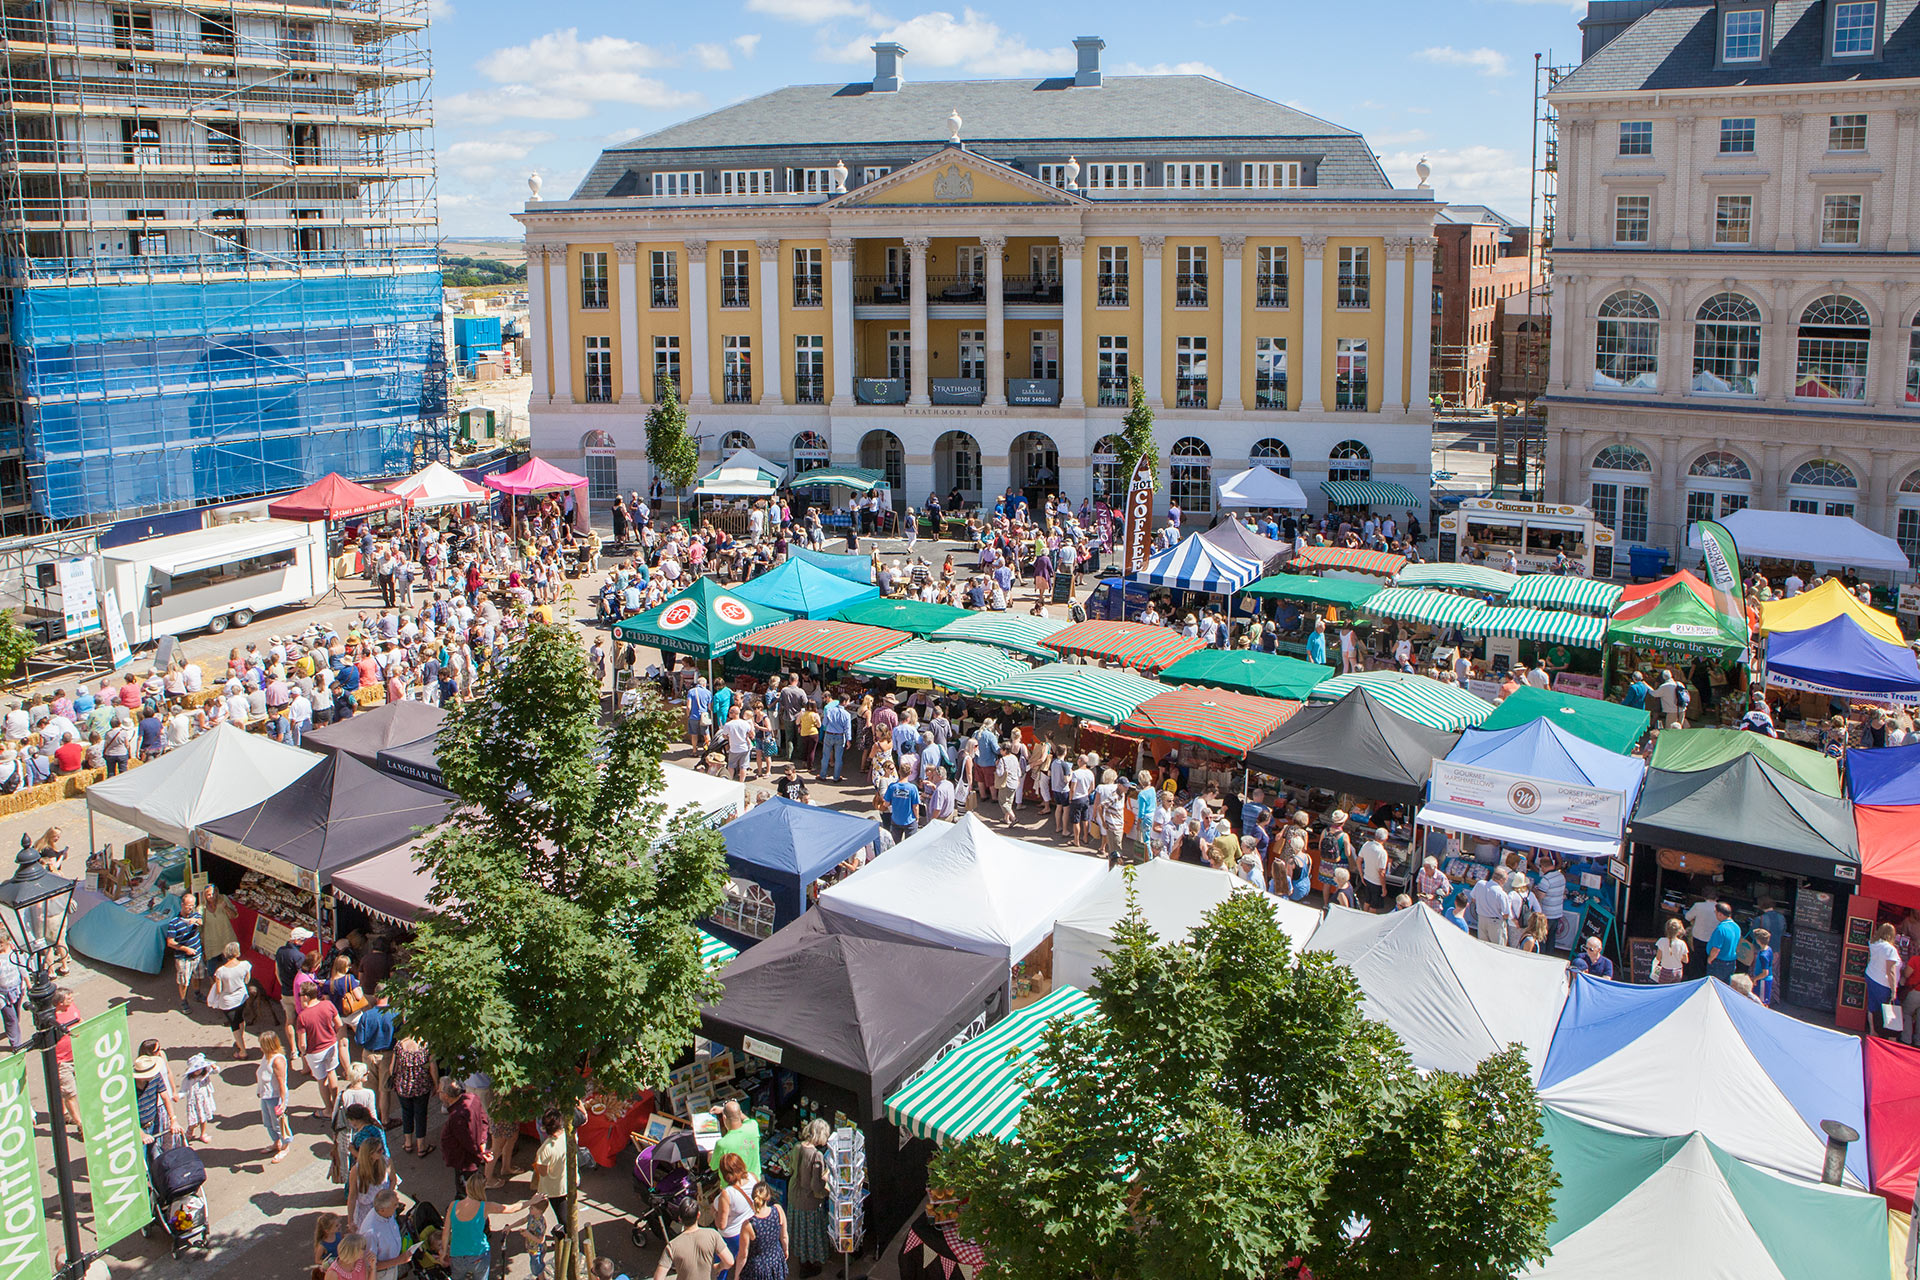 The Dorset Food Festival is an annual food festival in Queen Mother Square each August